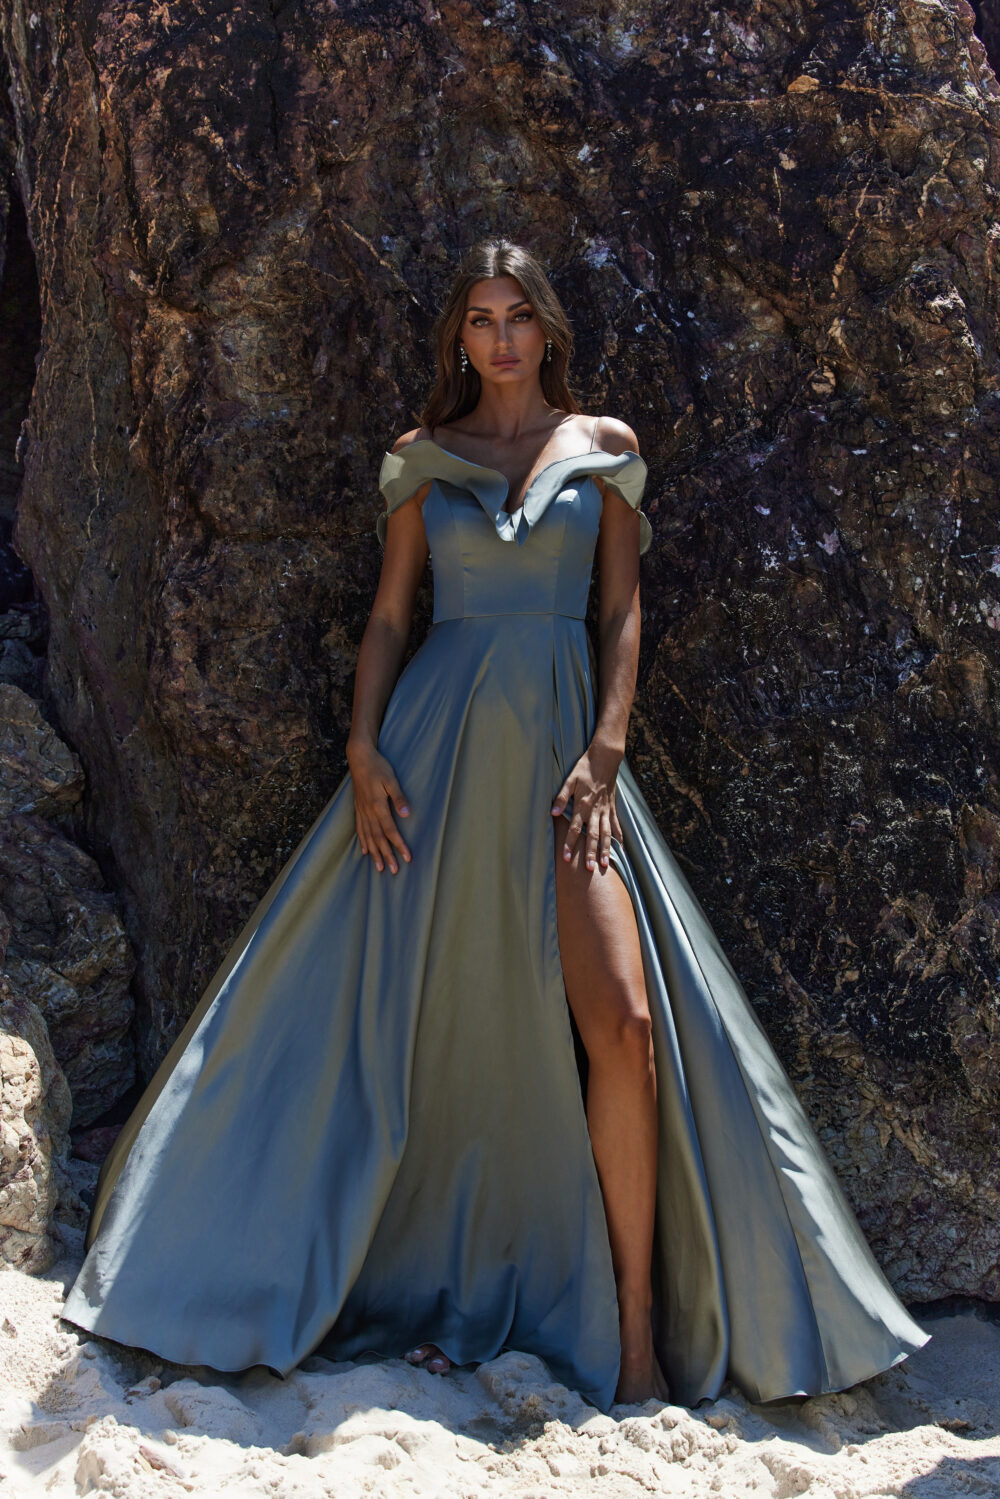 ORCHARD TO879 Rever dress by Tania Olsen Designs